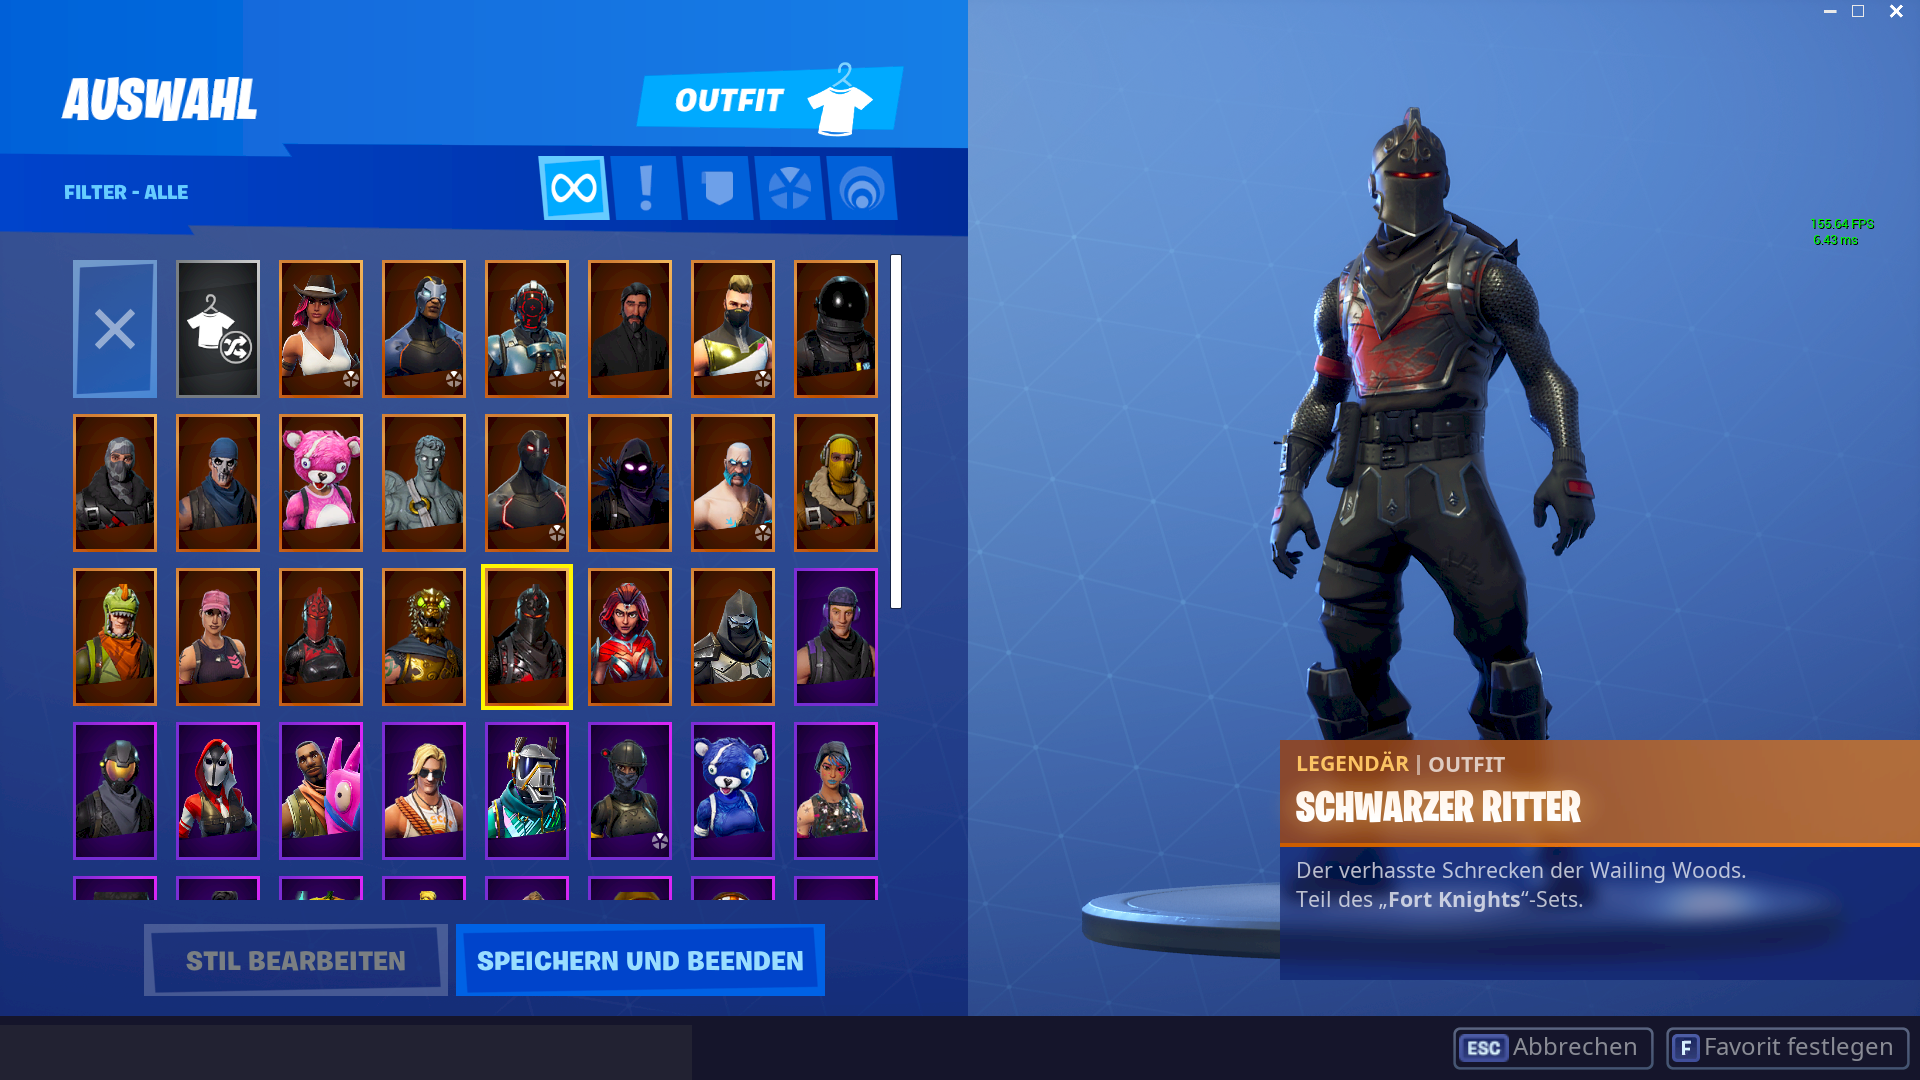 Does my fortnite account worth If yes, how much please in Euro